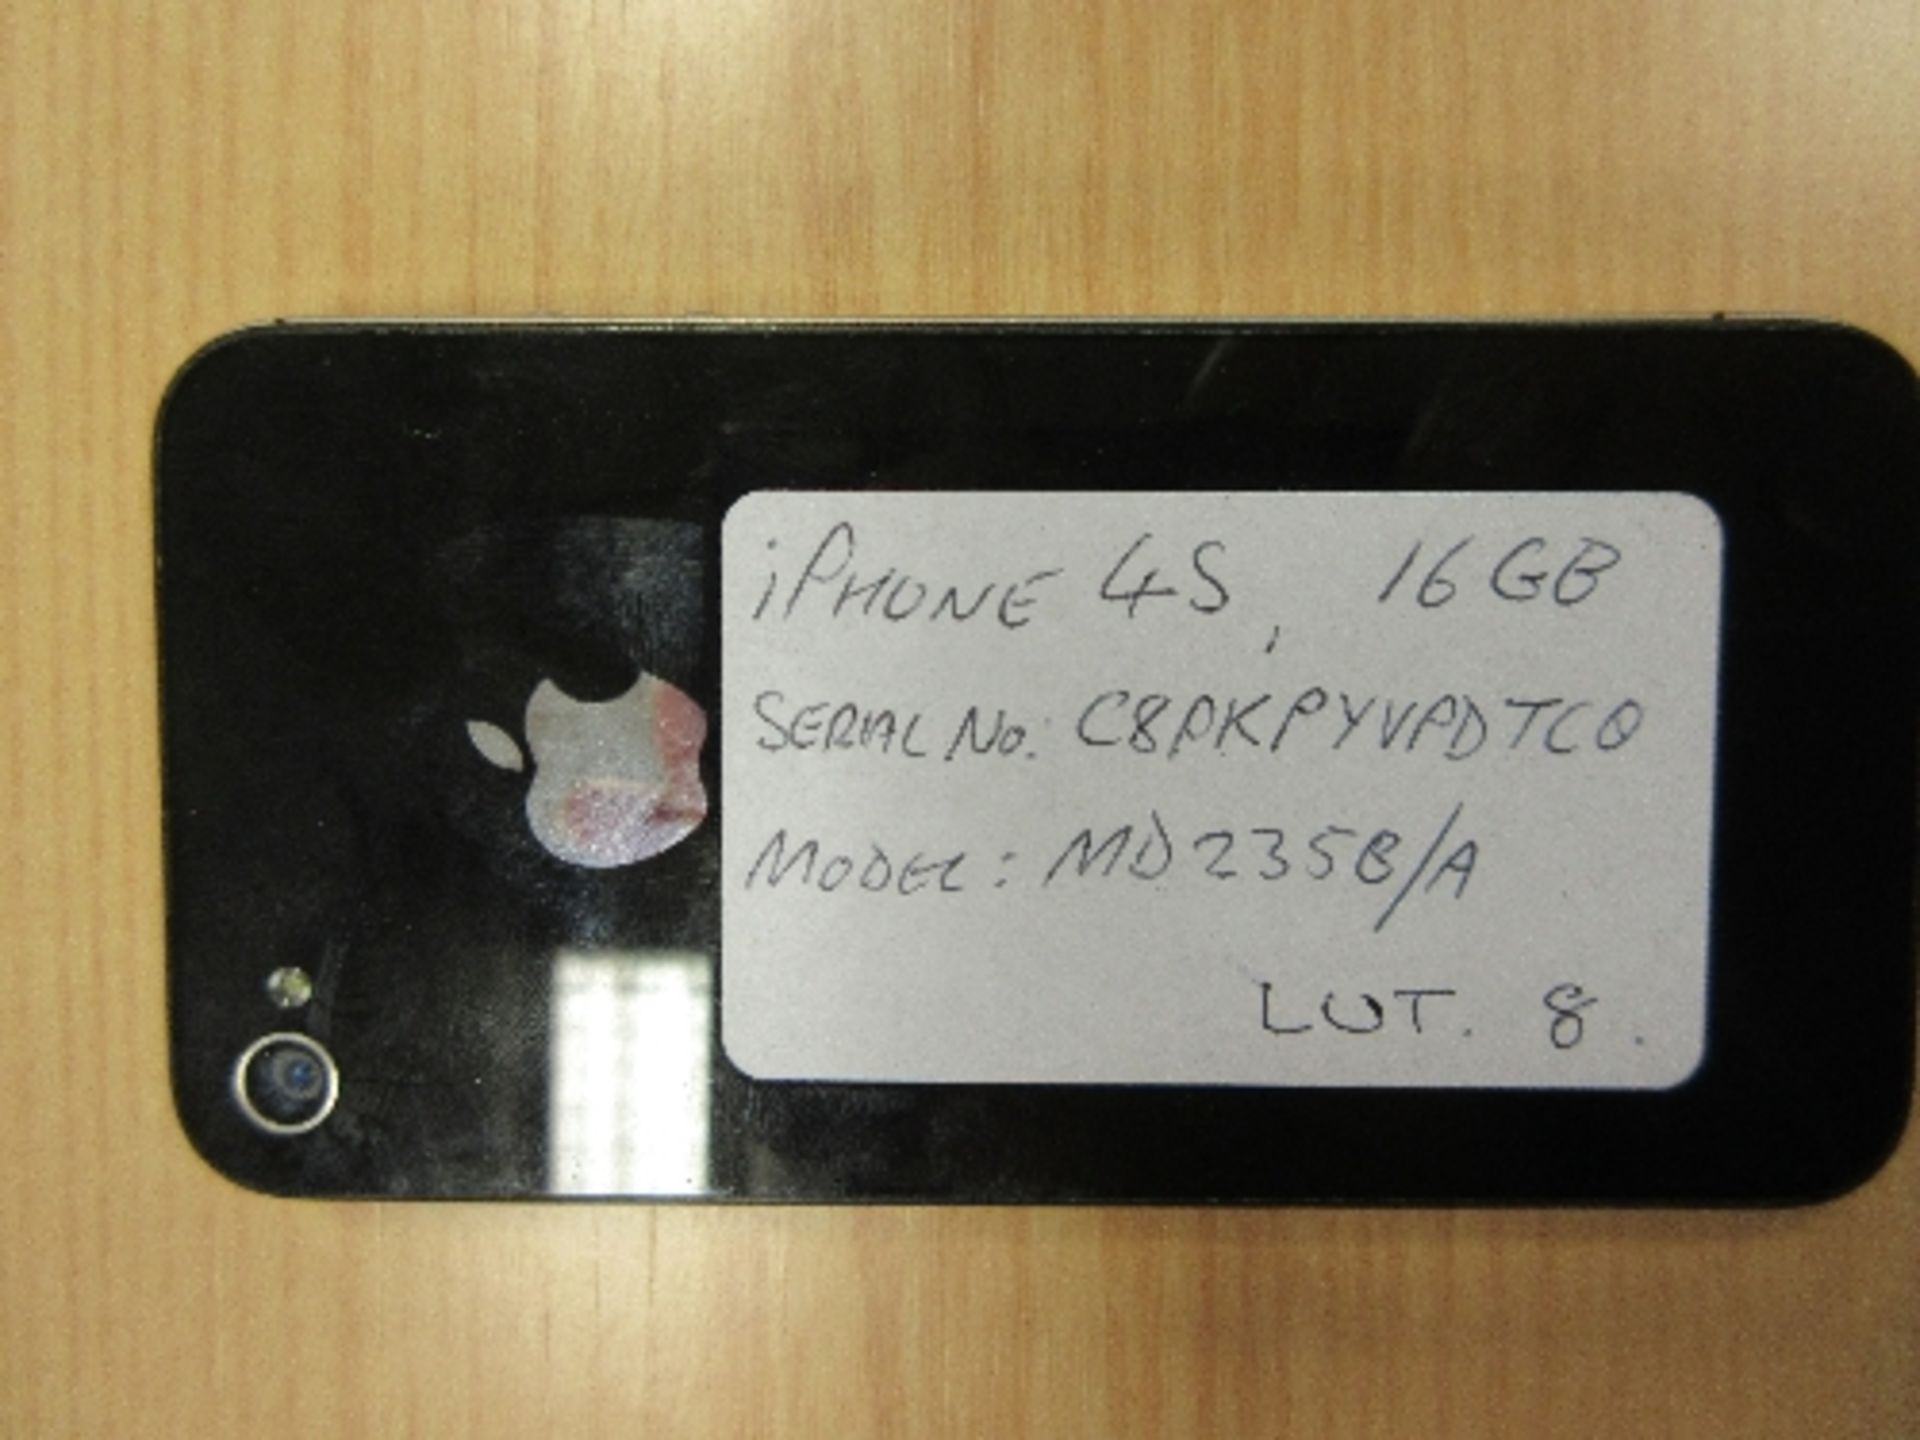 iPhone 4S, 16GB, Serial No. C8PKPYVPDTC0, Model MD235B/A - Image 2 of 2